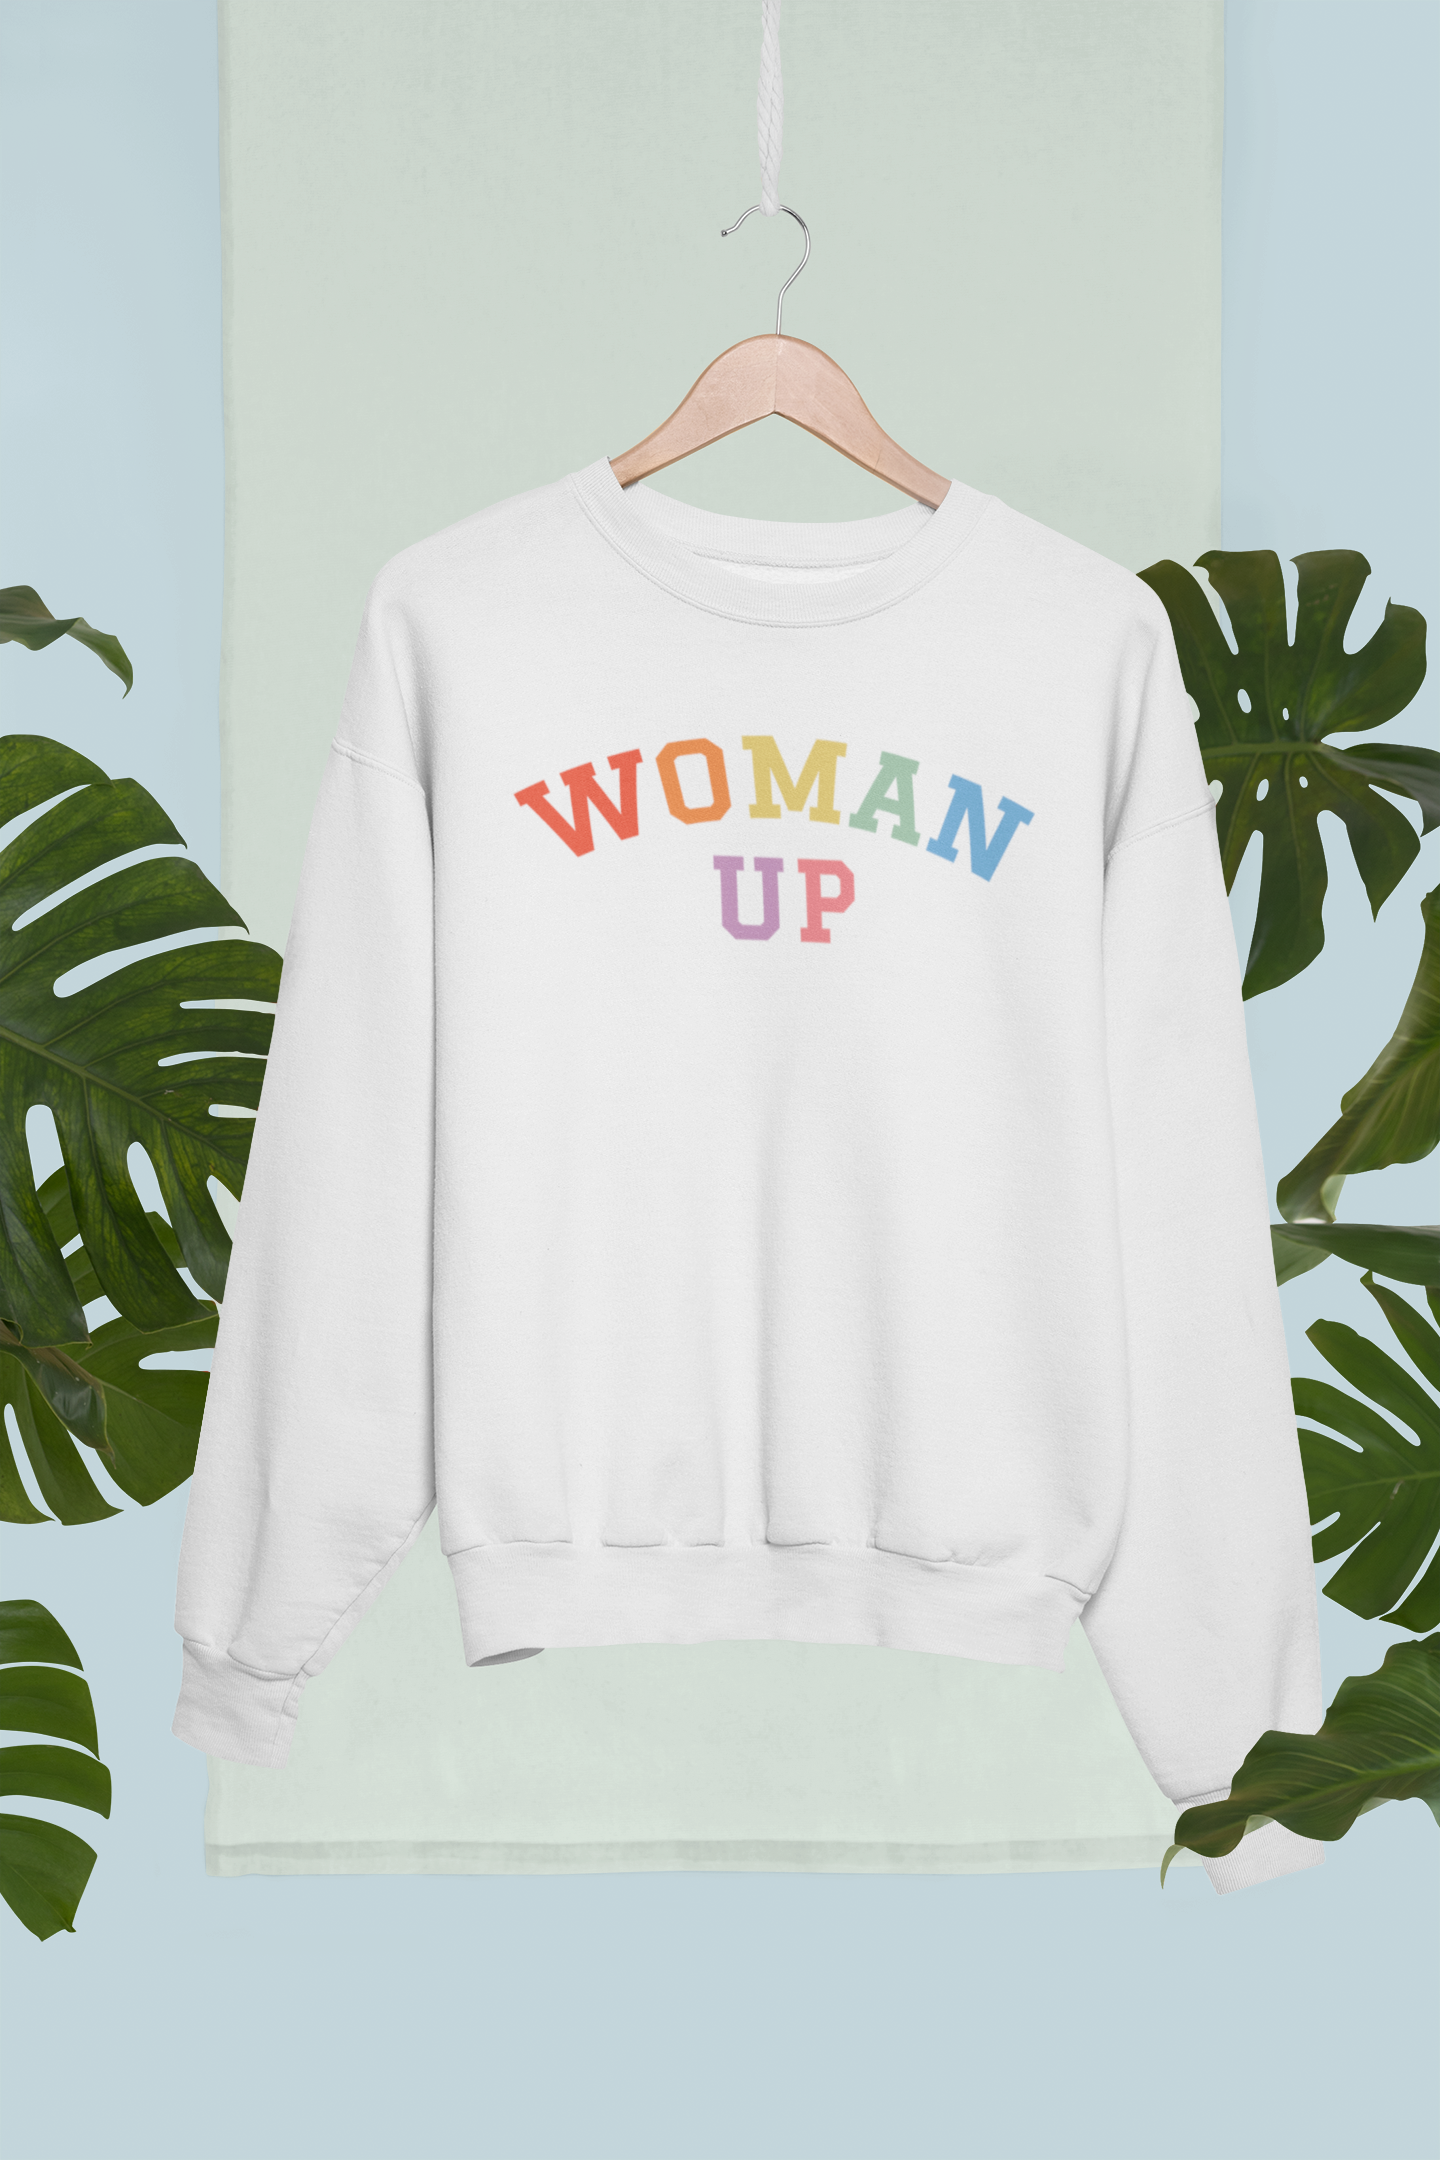 crewneck-sweatshirt-mockup-on-a-hanger-against-palm-trees-clipart-27021 (1).png